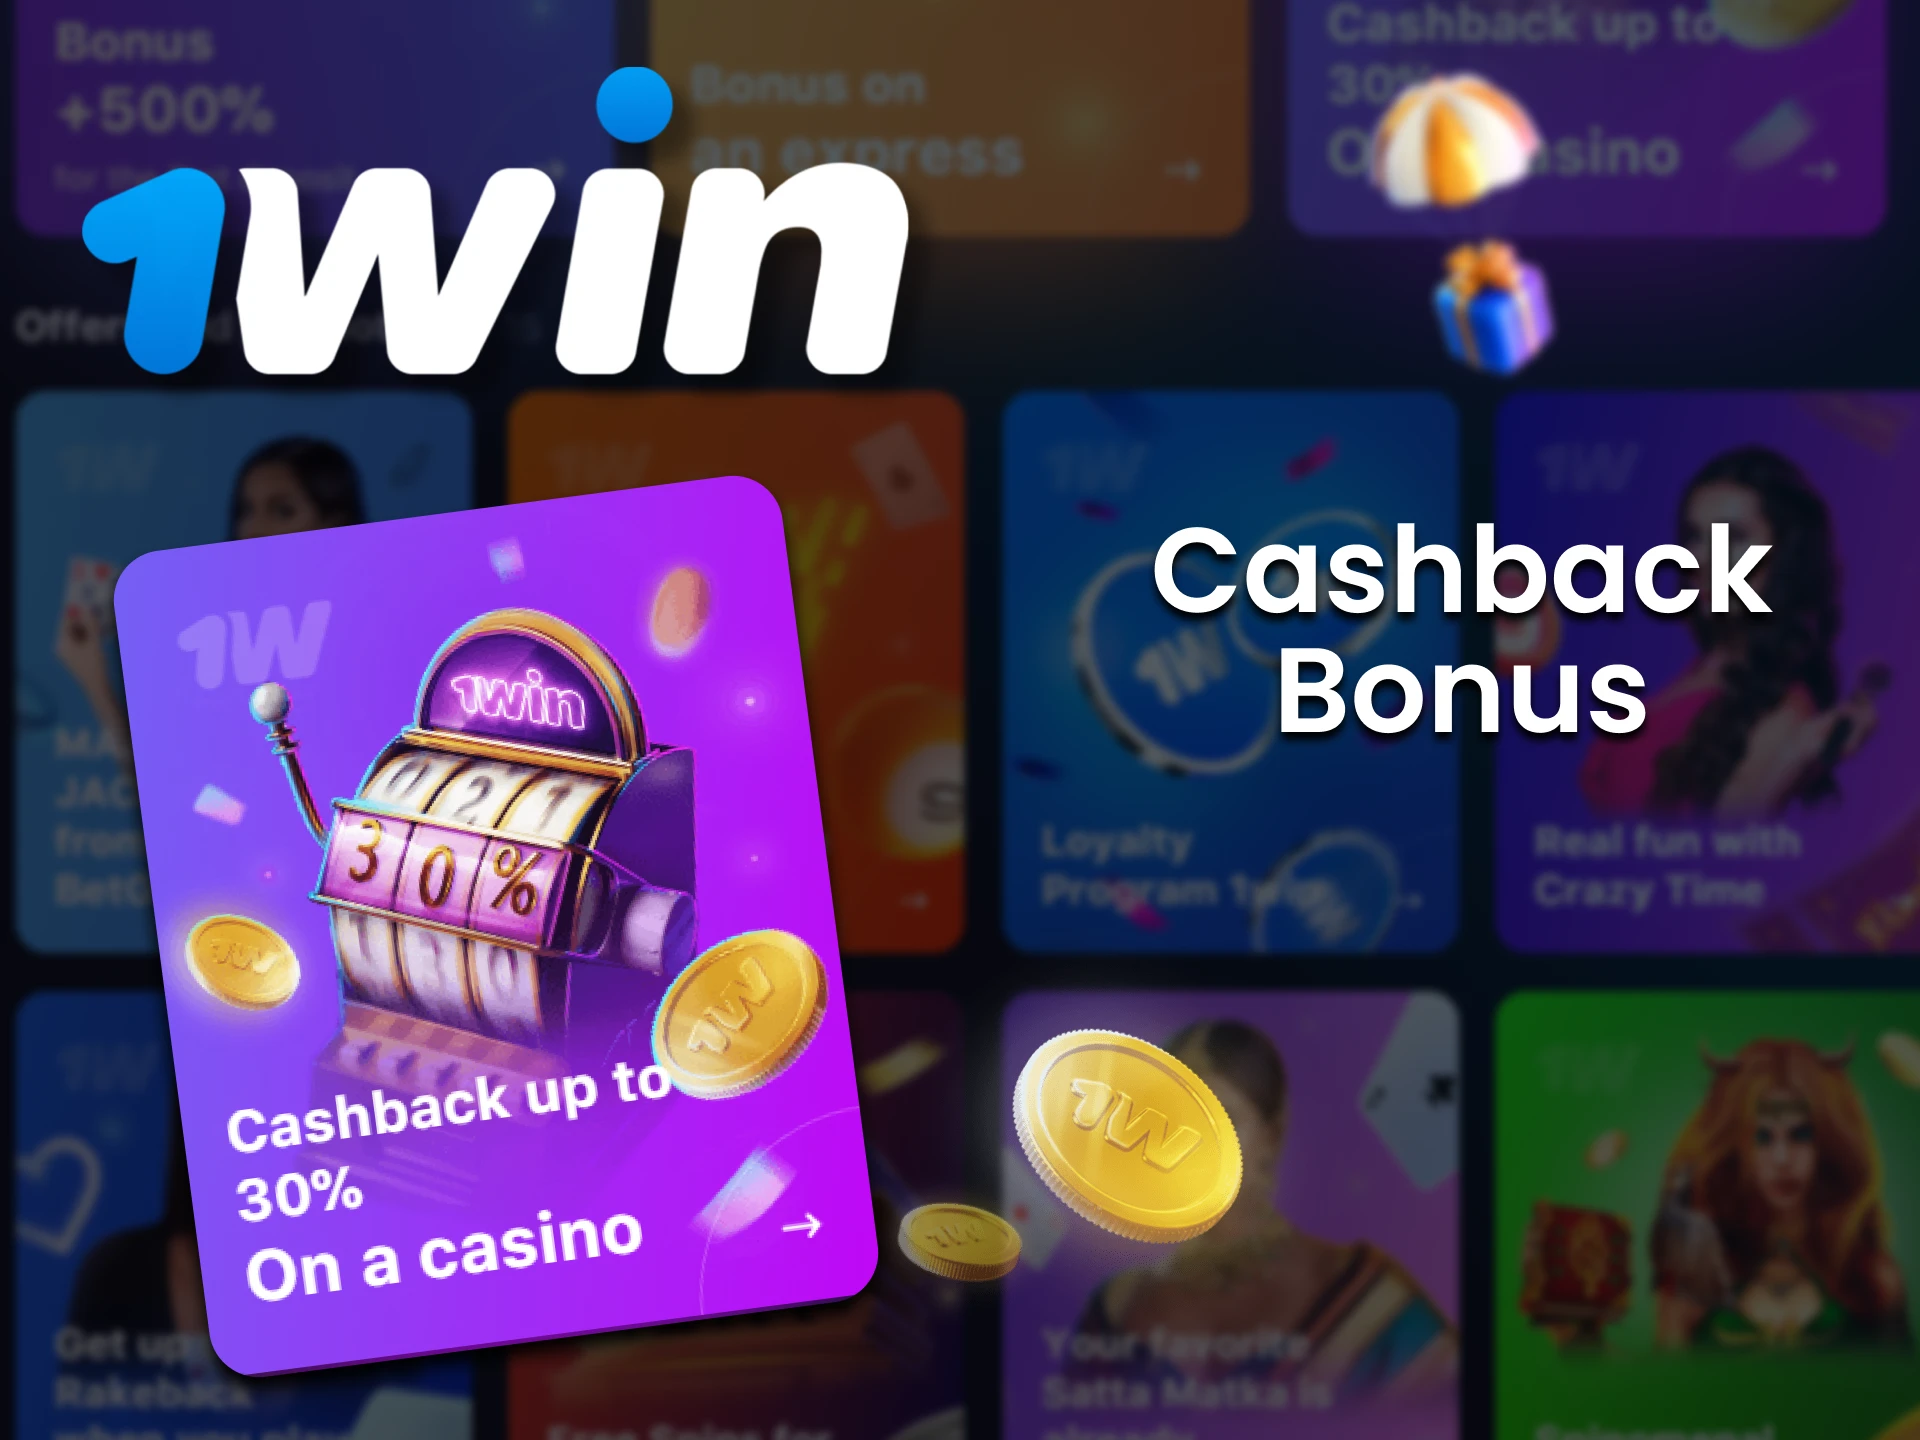 You can get a cashback bonus for cricket betting from 1win.